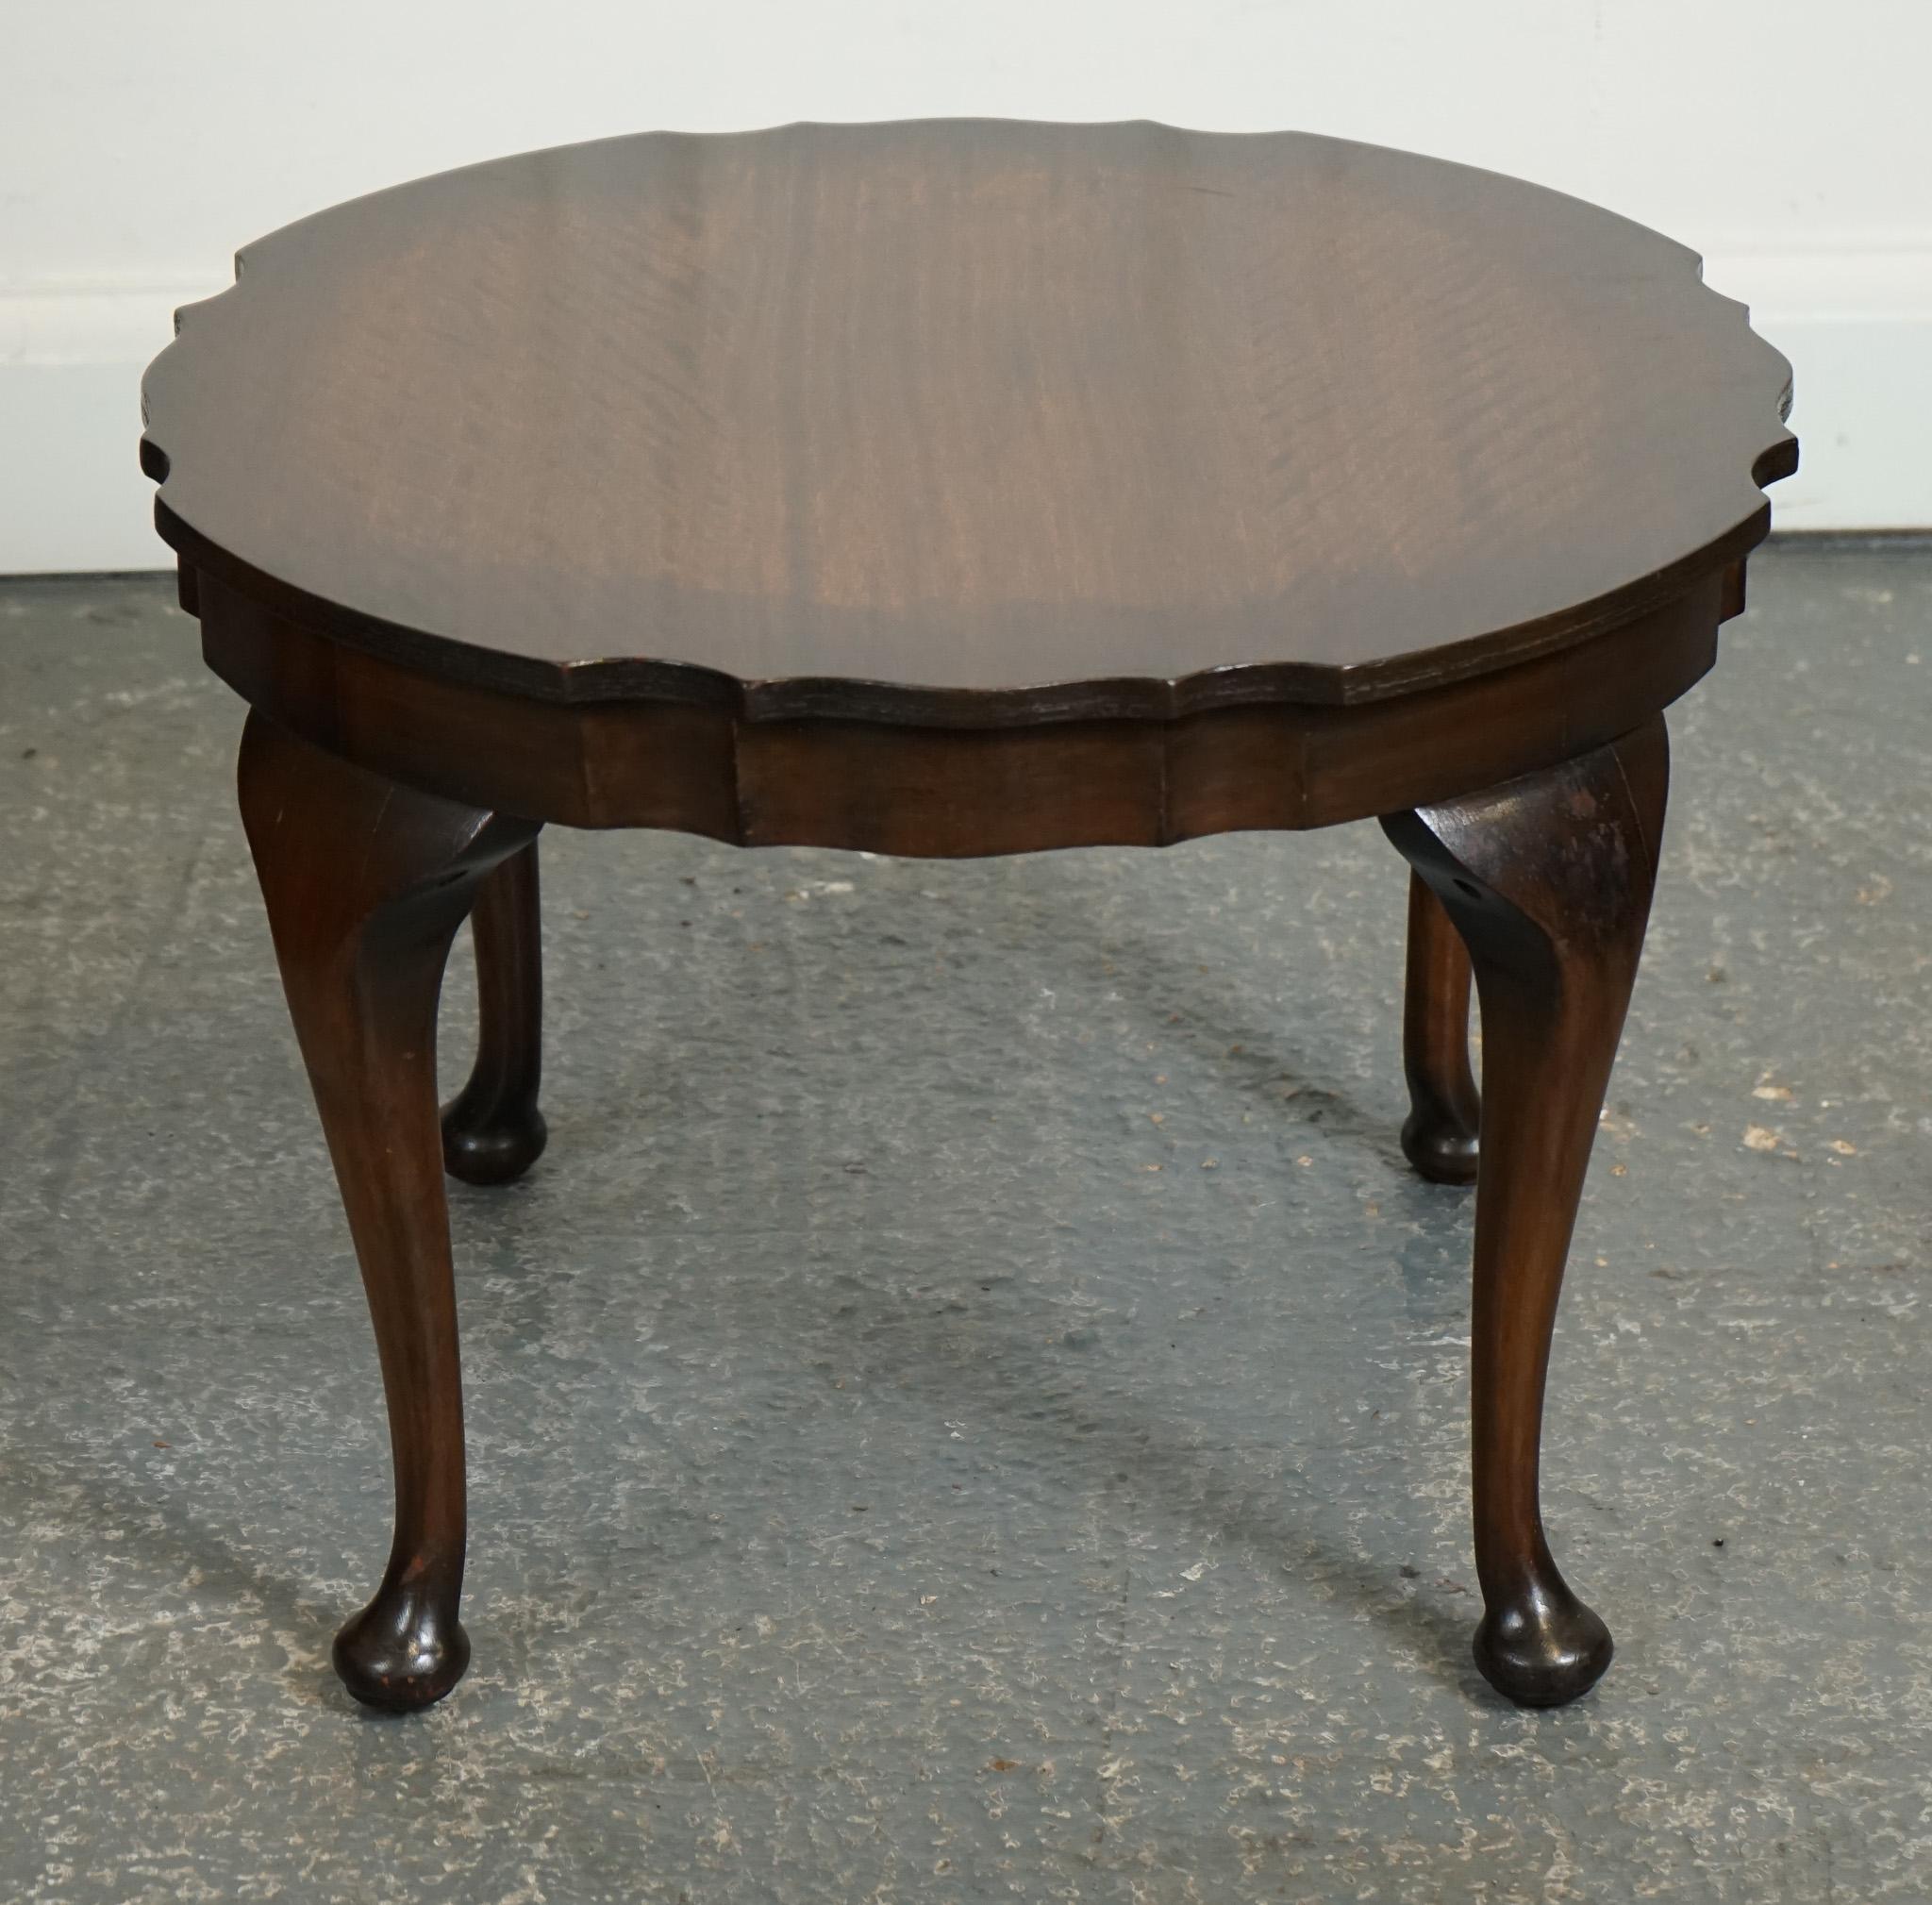 

We are delighted to offer for sale this Lovely Small pie Crust Shaped Side Table.

The table is in a good condition however please see the top of the table as there is some discolouration. To us this only adds to its beauty.

Please carefully